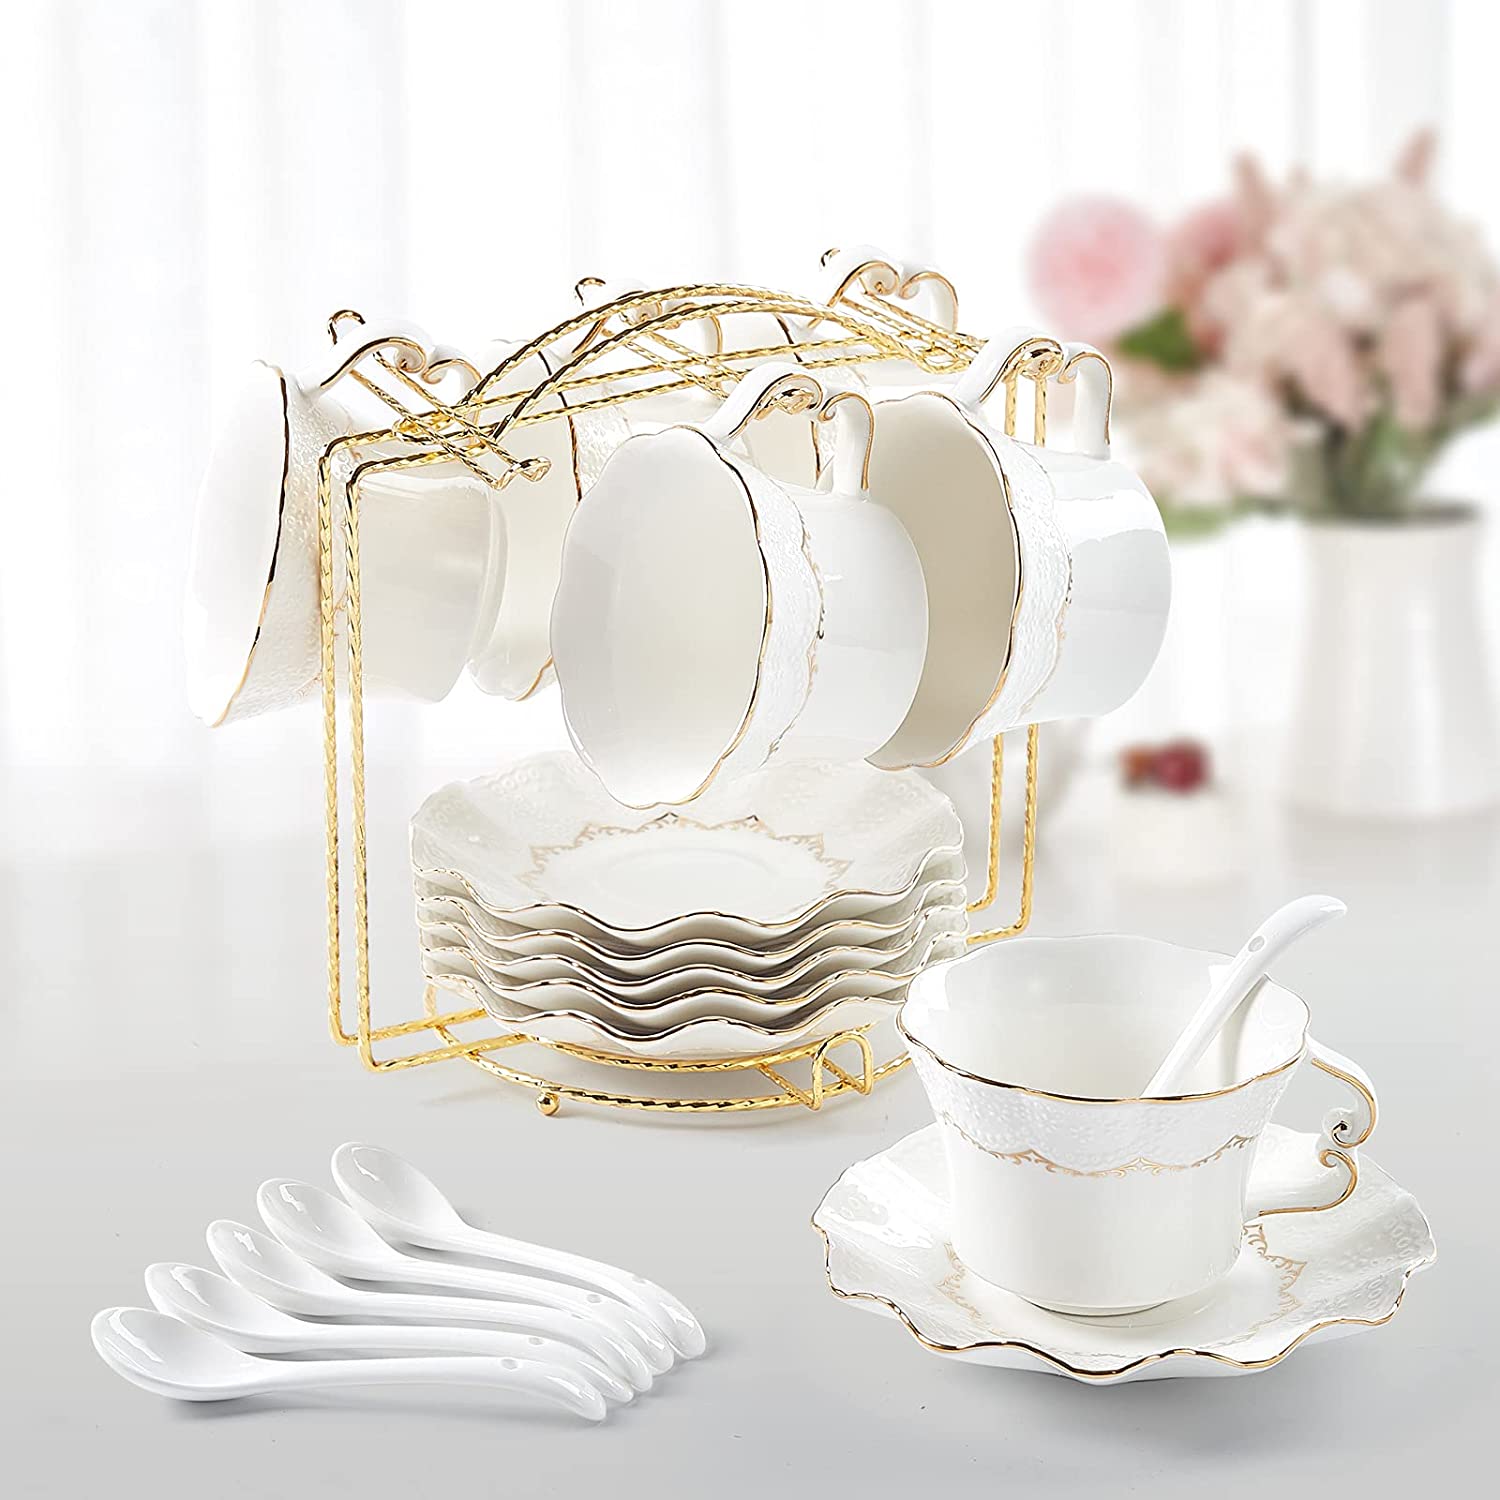 Dujust Tea Cups and Saucers Set of 6 (250ml/8.5oz) Luxury Tea Cup Set with Gold Trim, Embossed Coffee Cups with Metal Stand, British Royal Porcelain Tea Party Set - White